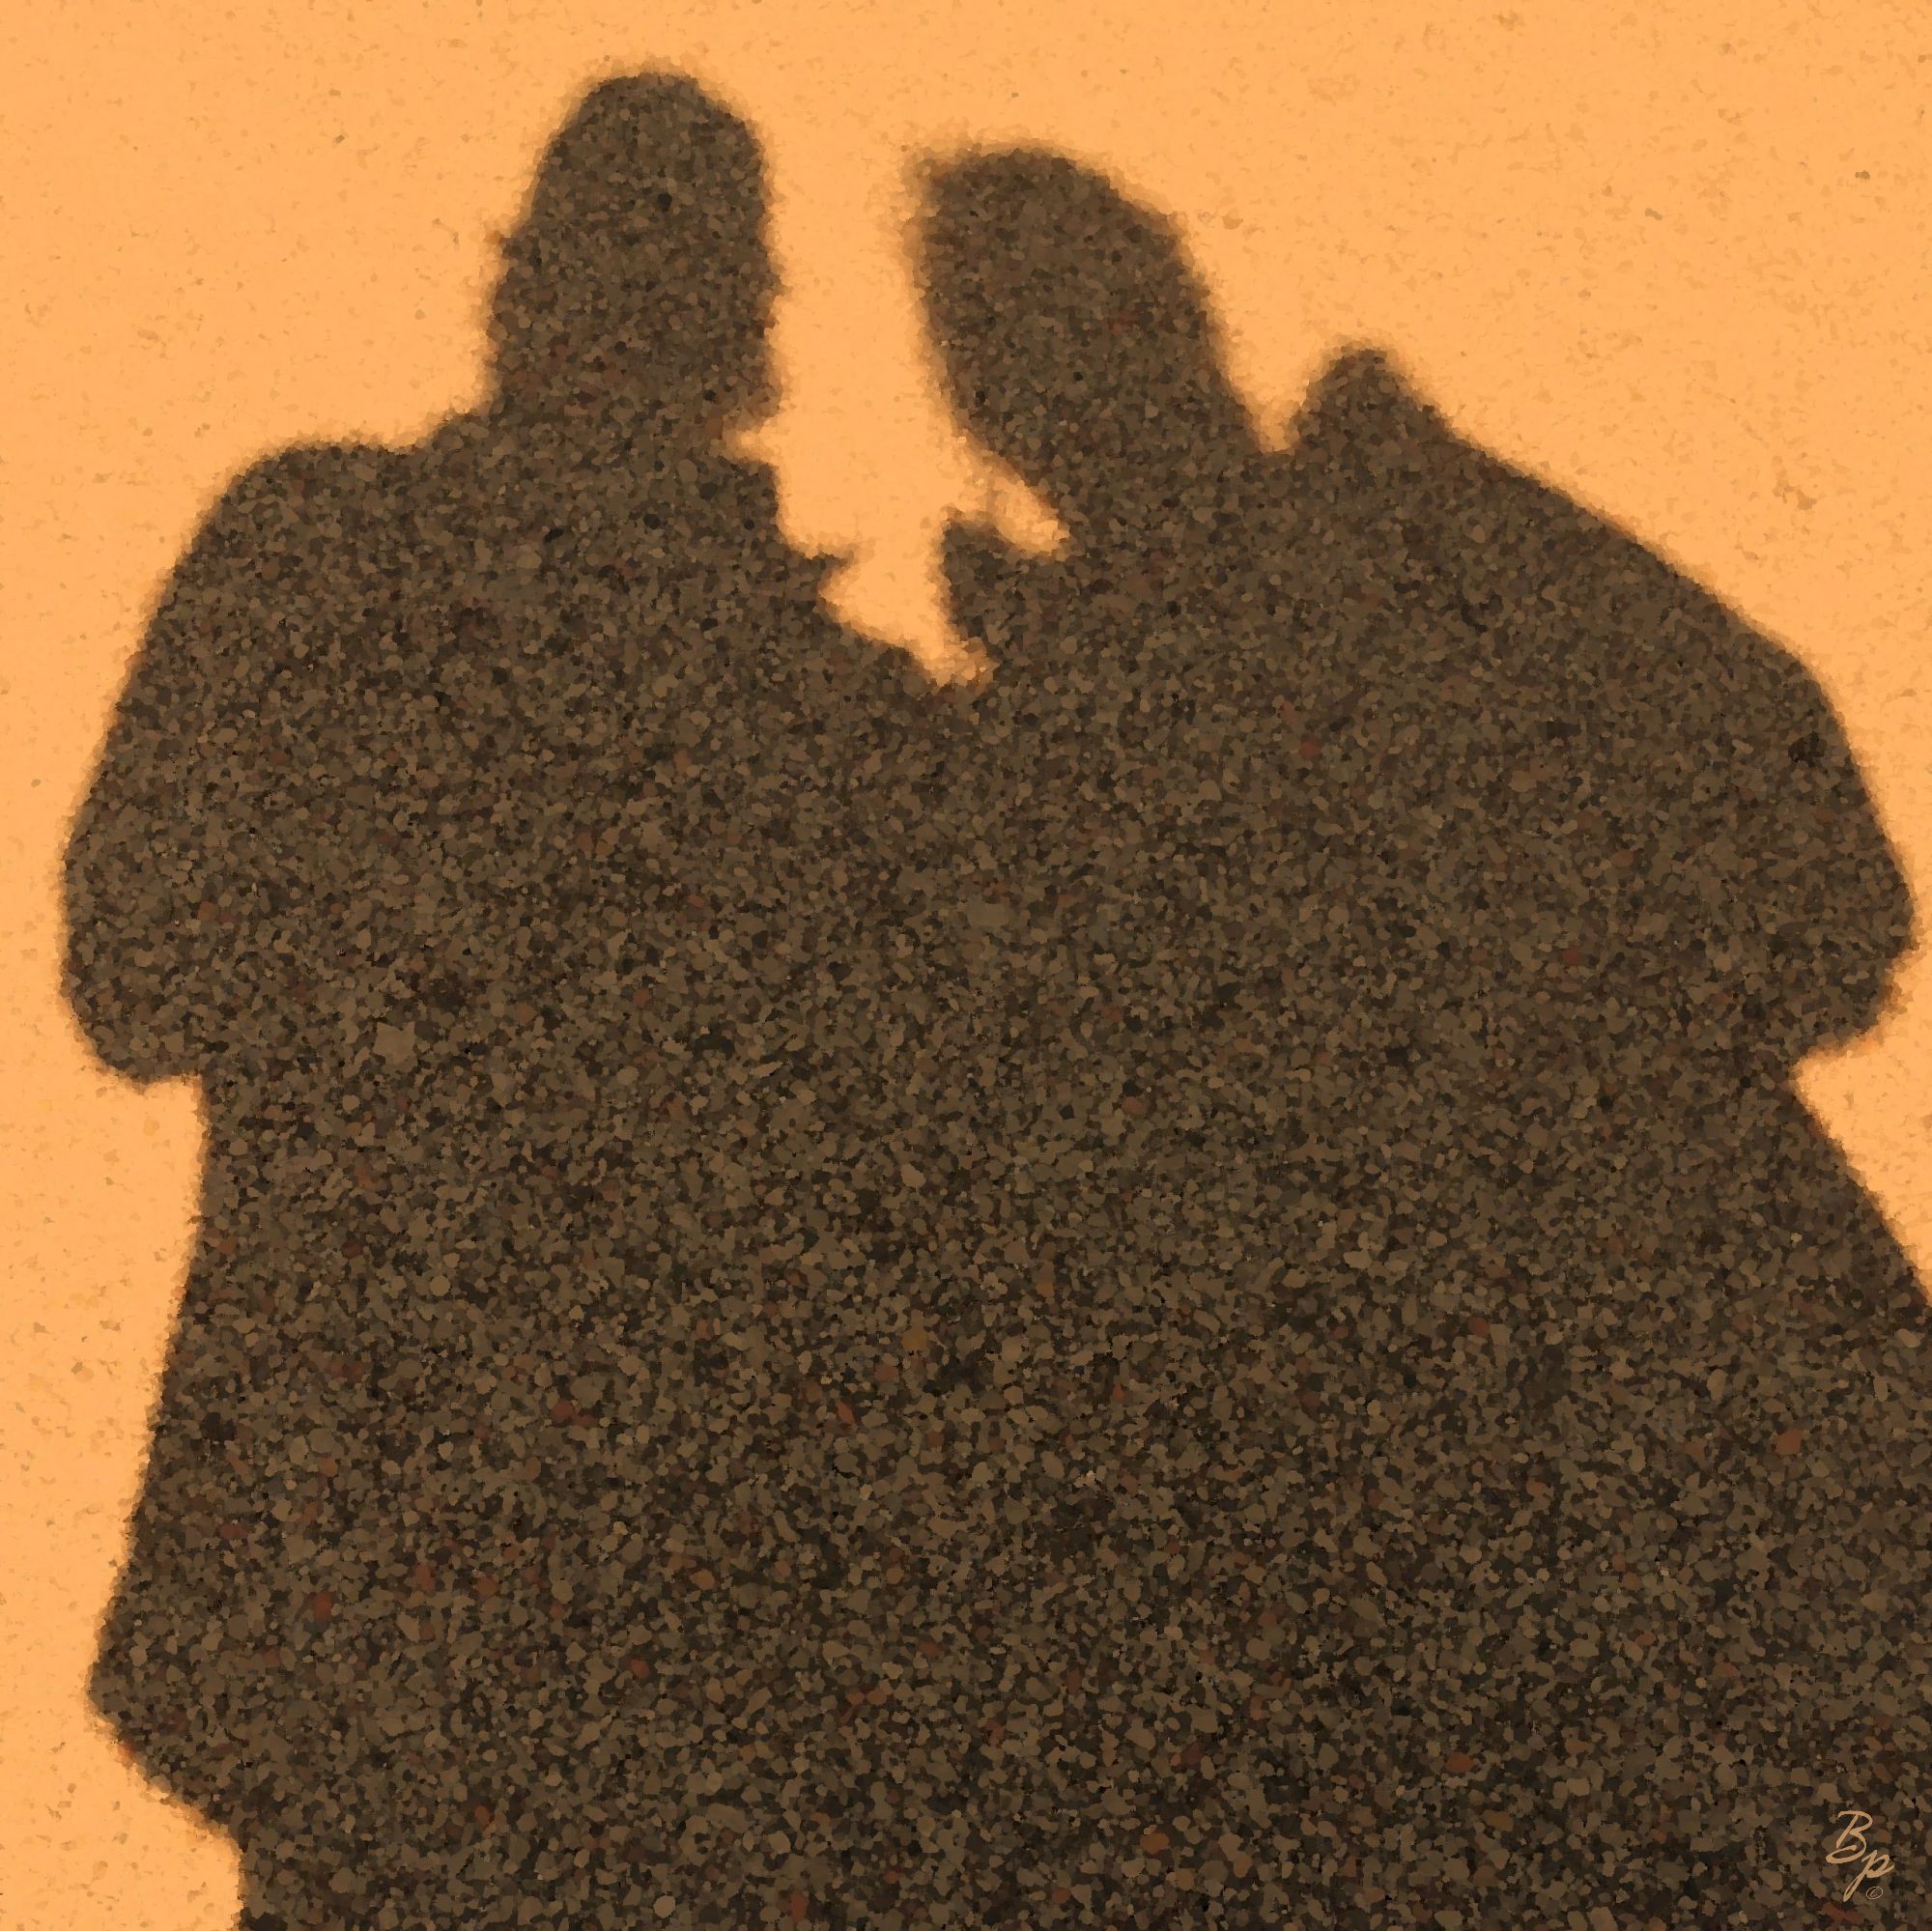 Shadow silouettes of two individuals a man and a woman, the pebbles of the street showing up better in the shadow than the sun, oh, I signed all of these with a new custom made watermark, which I am quite pleased with, the caligraphy effect and the color, going quite well with the rest